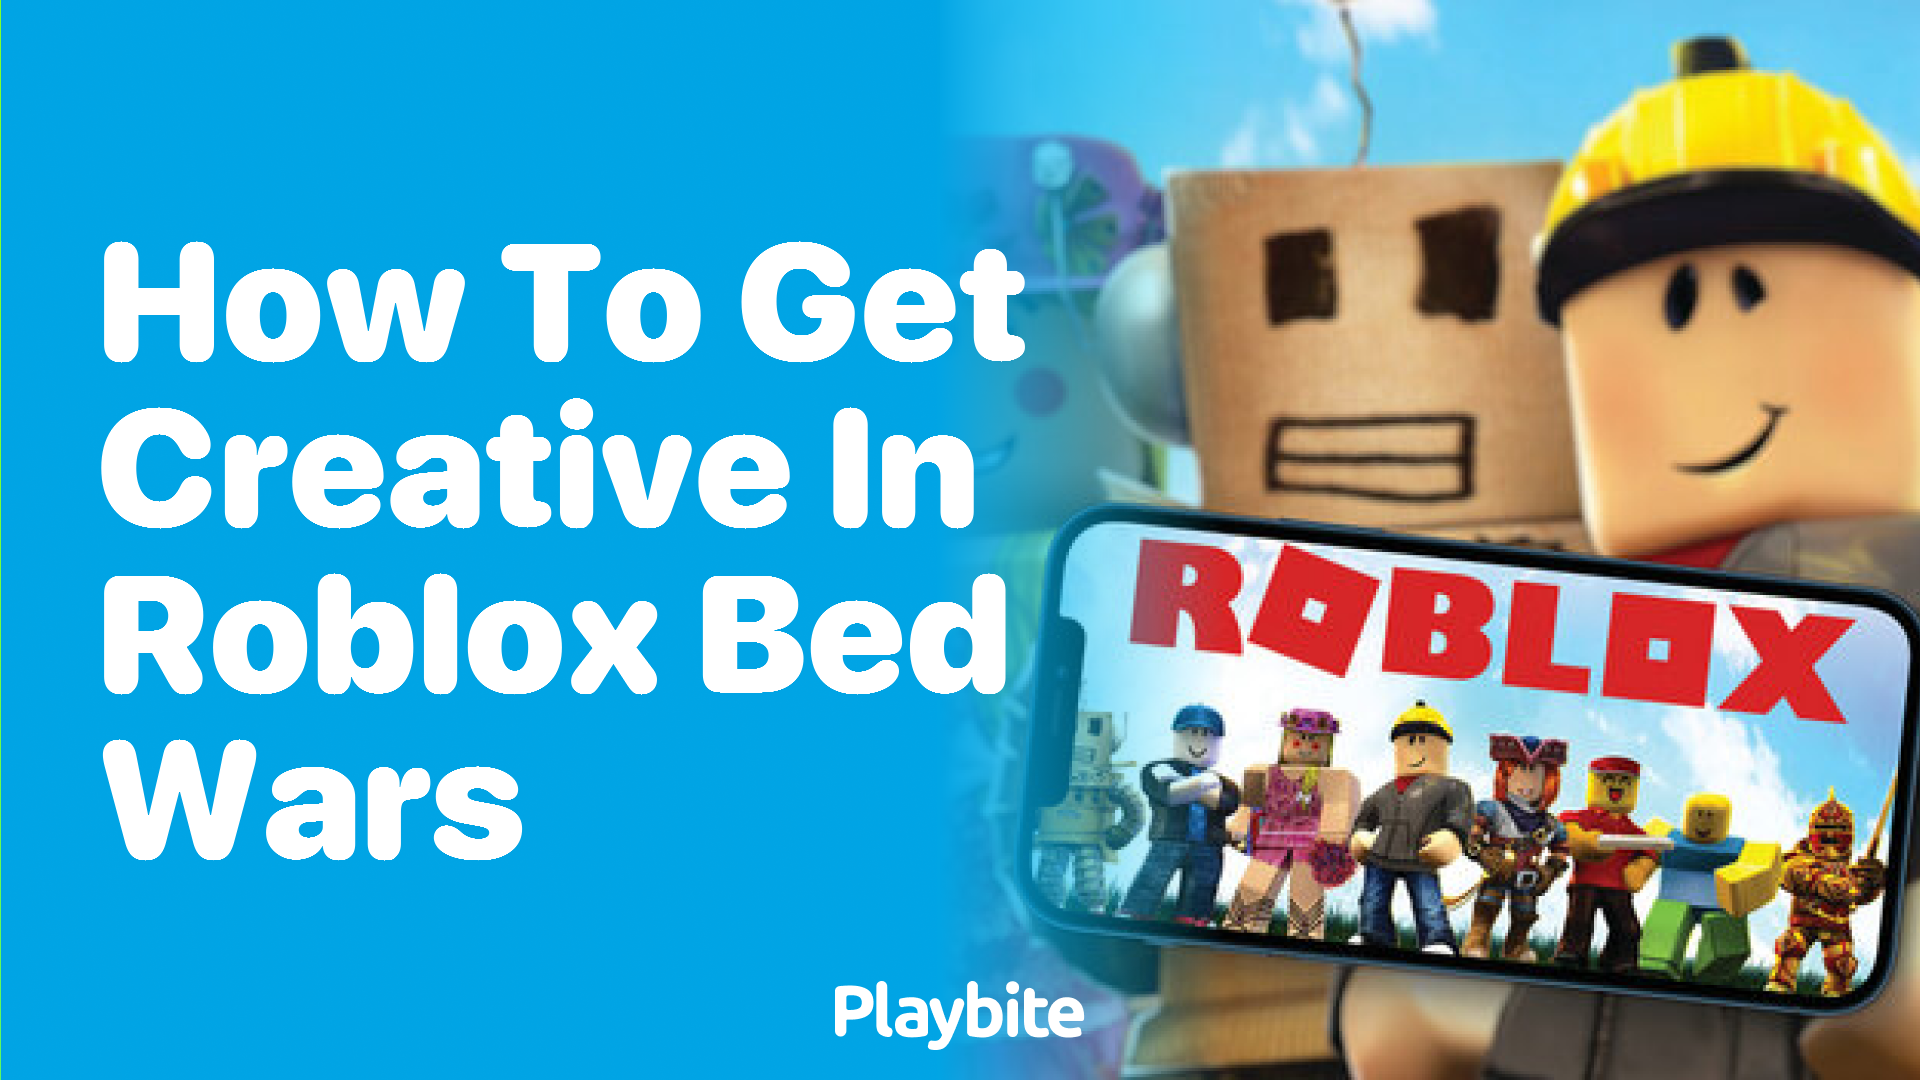 How to Get Creative in Roblox Bed Wars